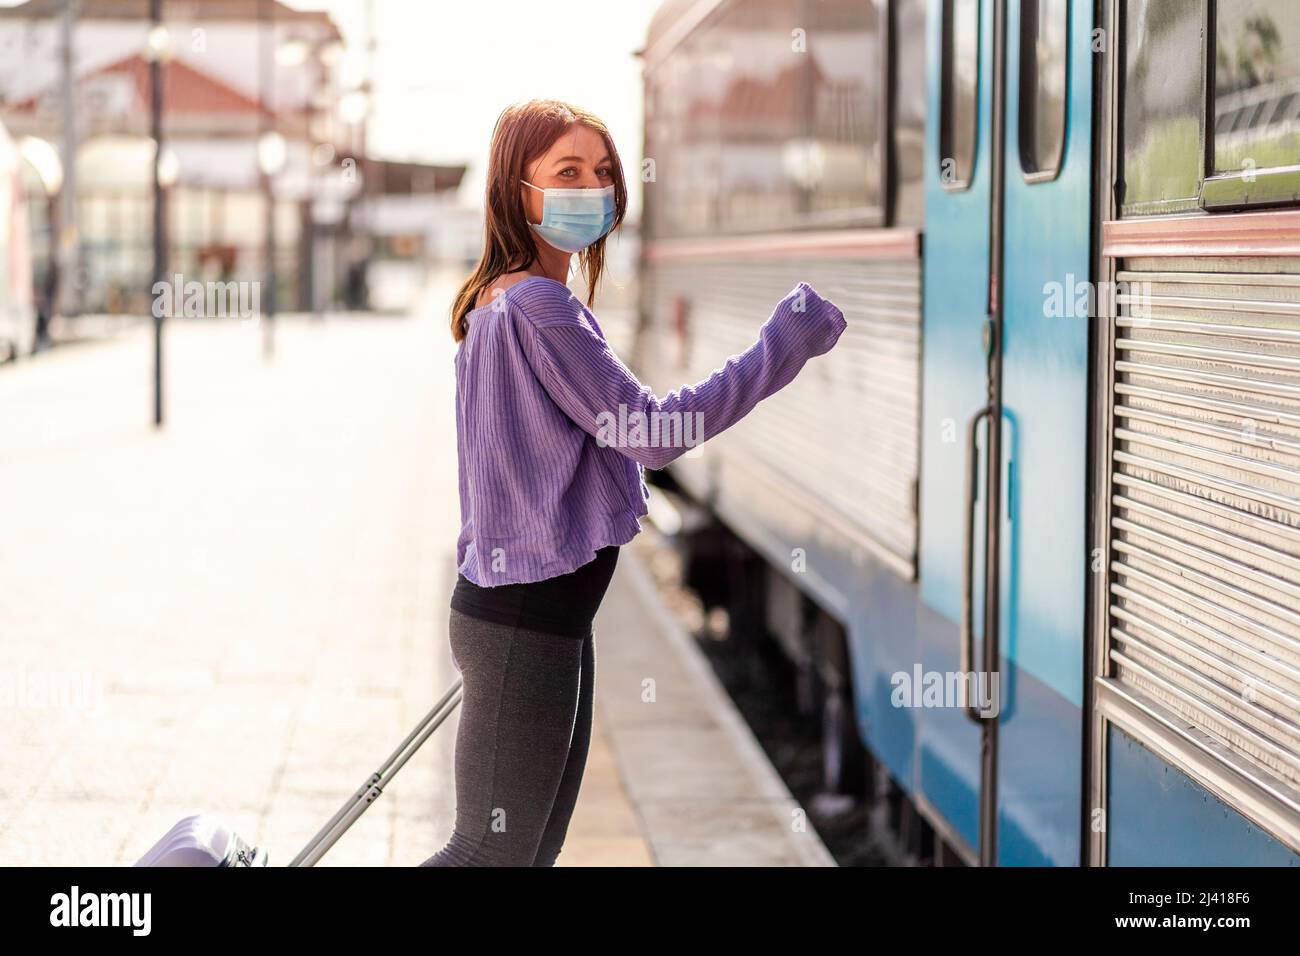 A young woman wearing mask and with a luggage ready to enter the train and depart Stock Photo